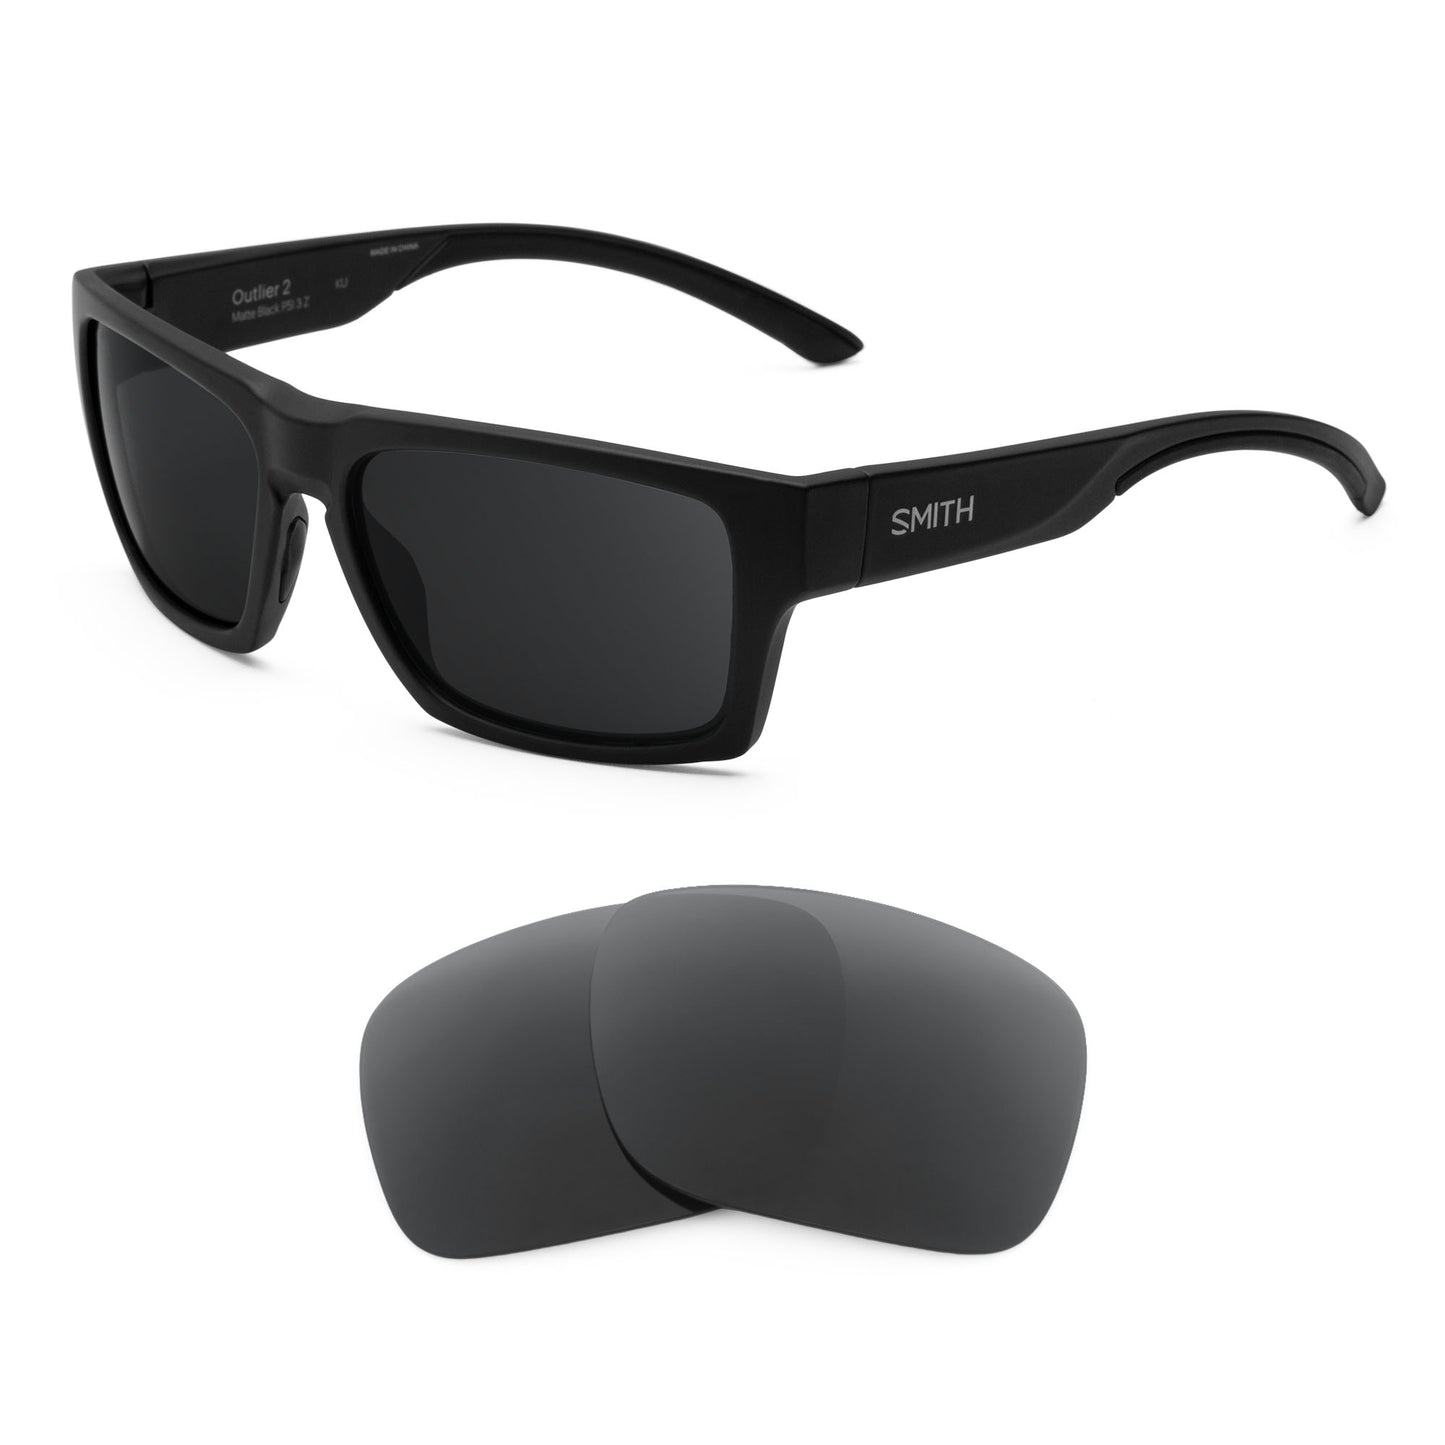 Smith Outlier 2 sunglasses with replacement lenses